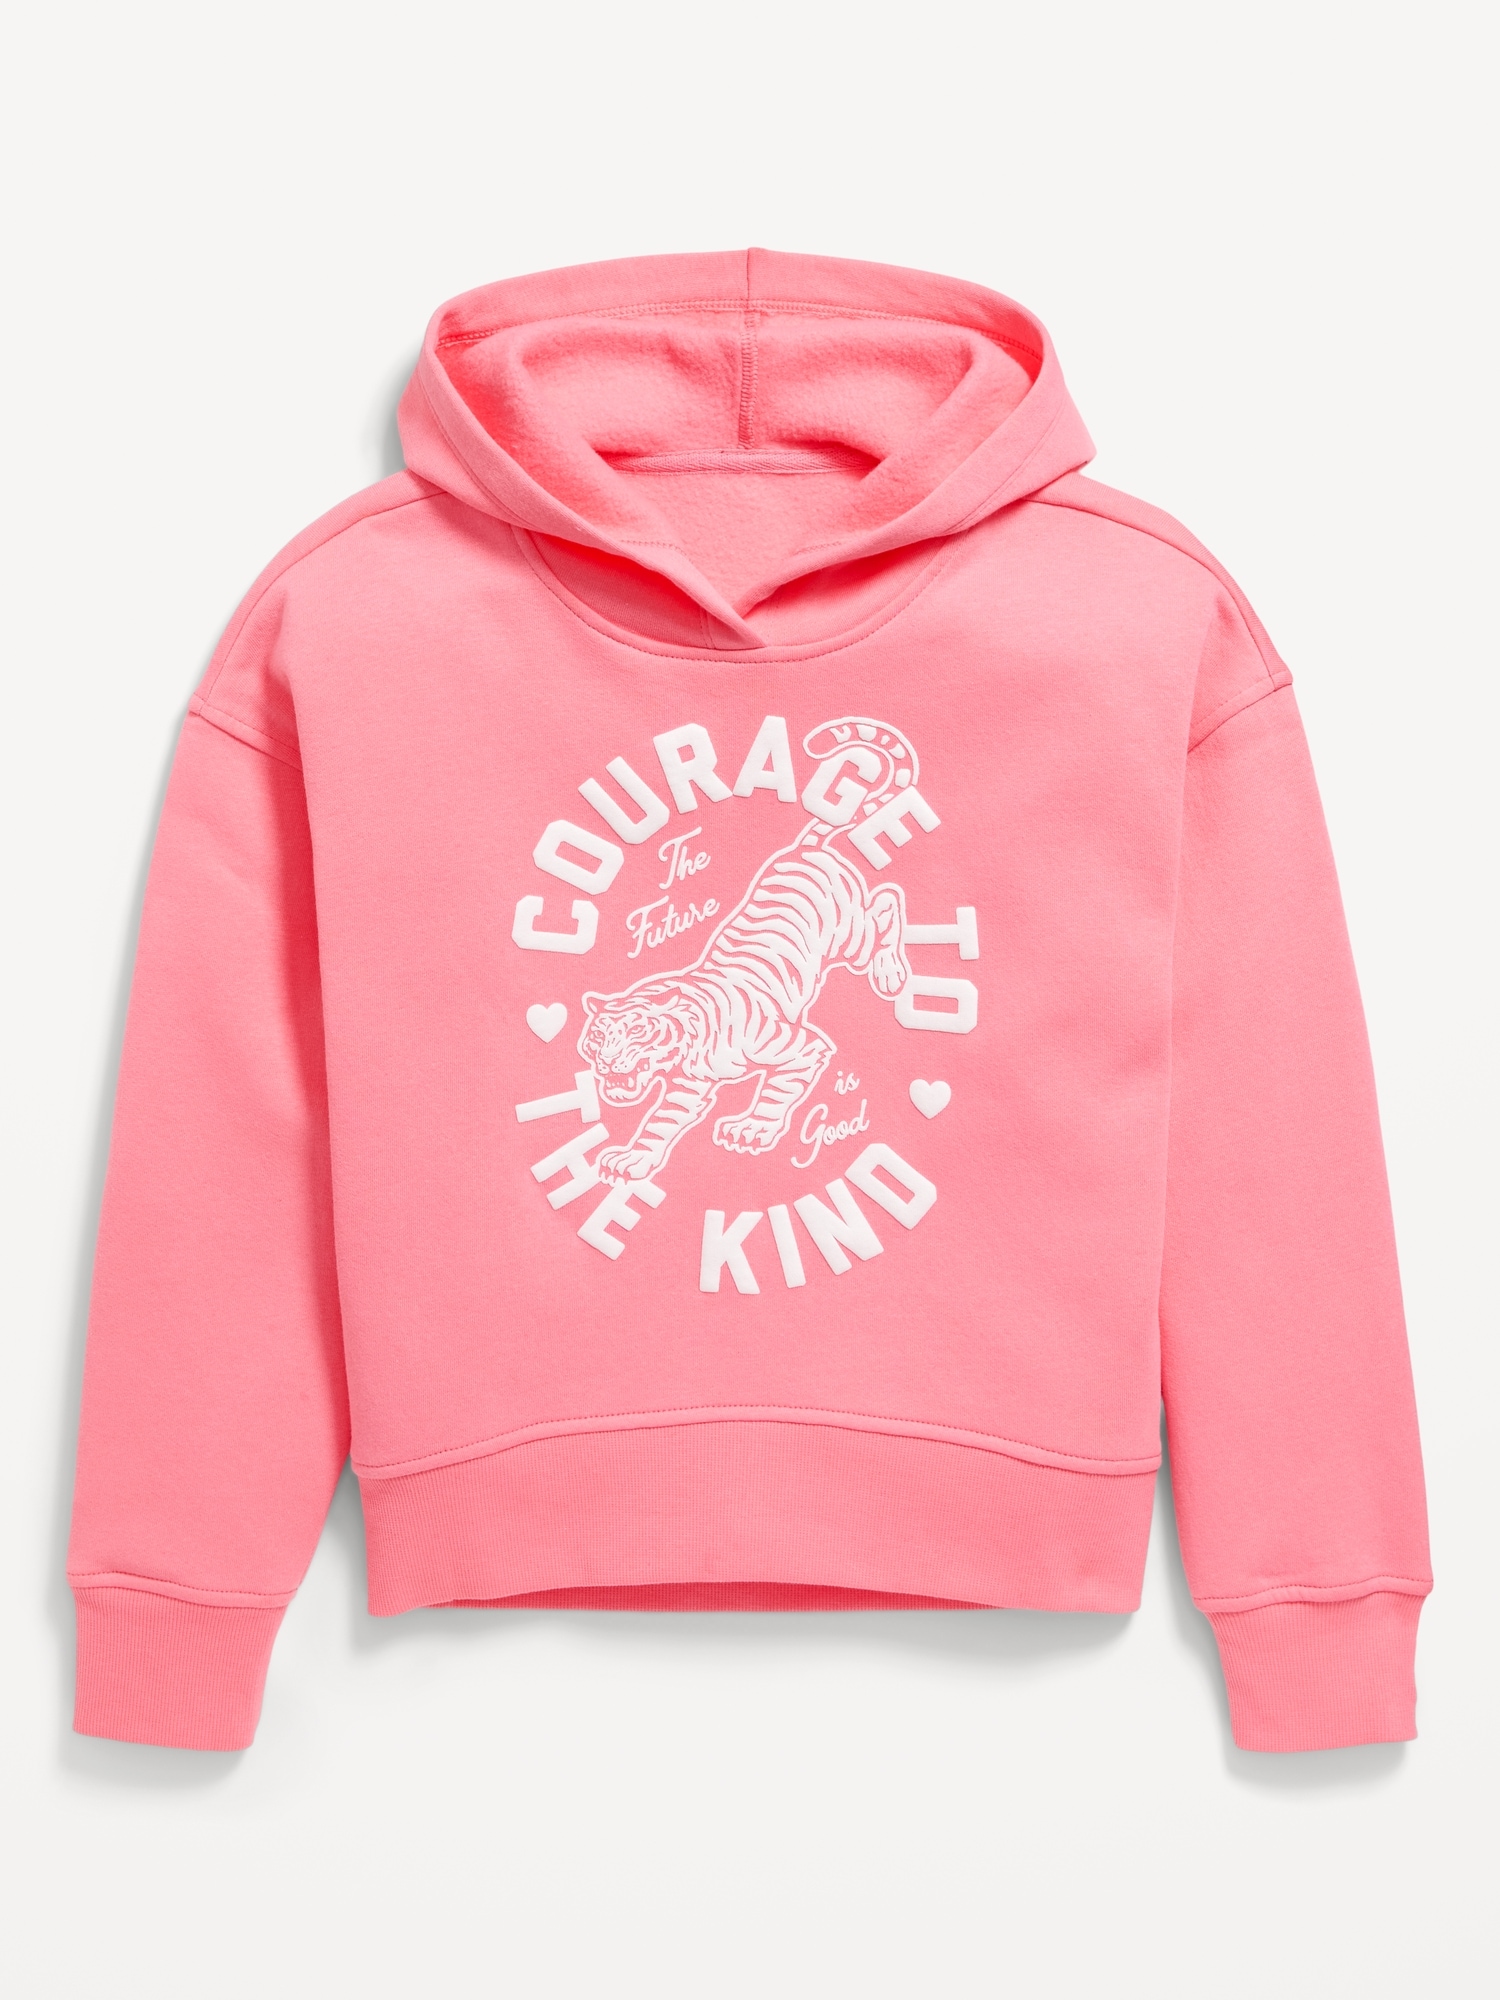 Vintage Graphic Hoodie for Girls